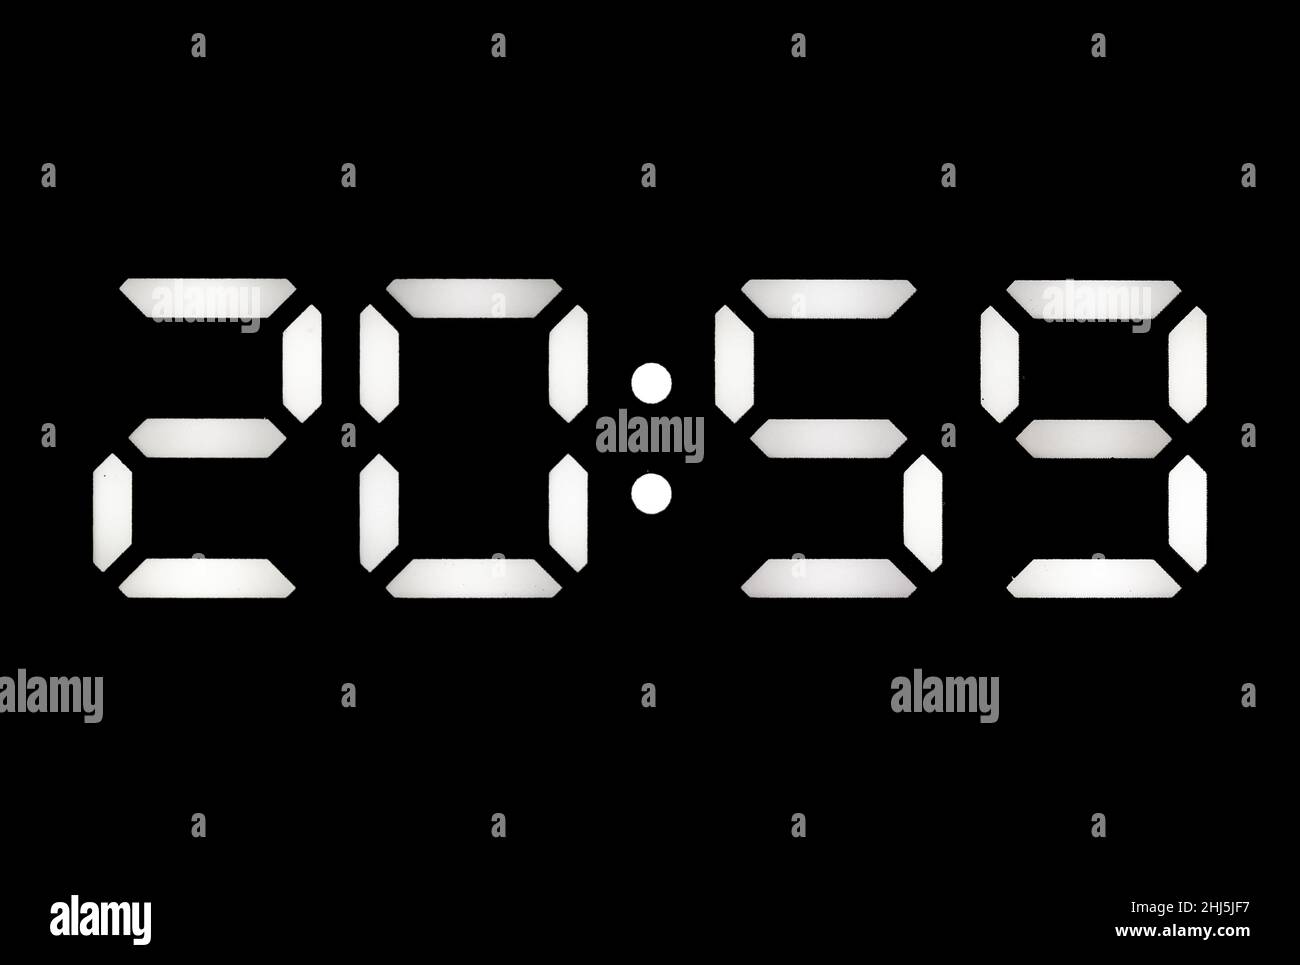 Real white led digital clock on a black background showing time 20:59 Stock Photo